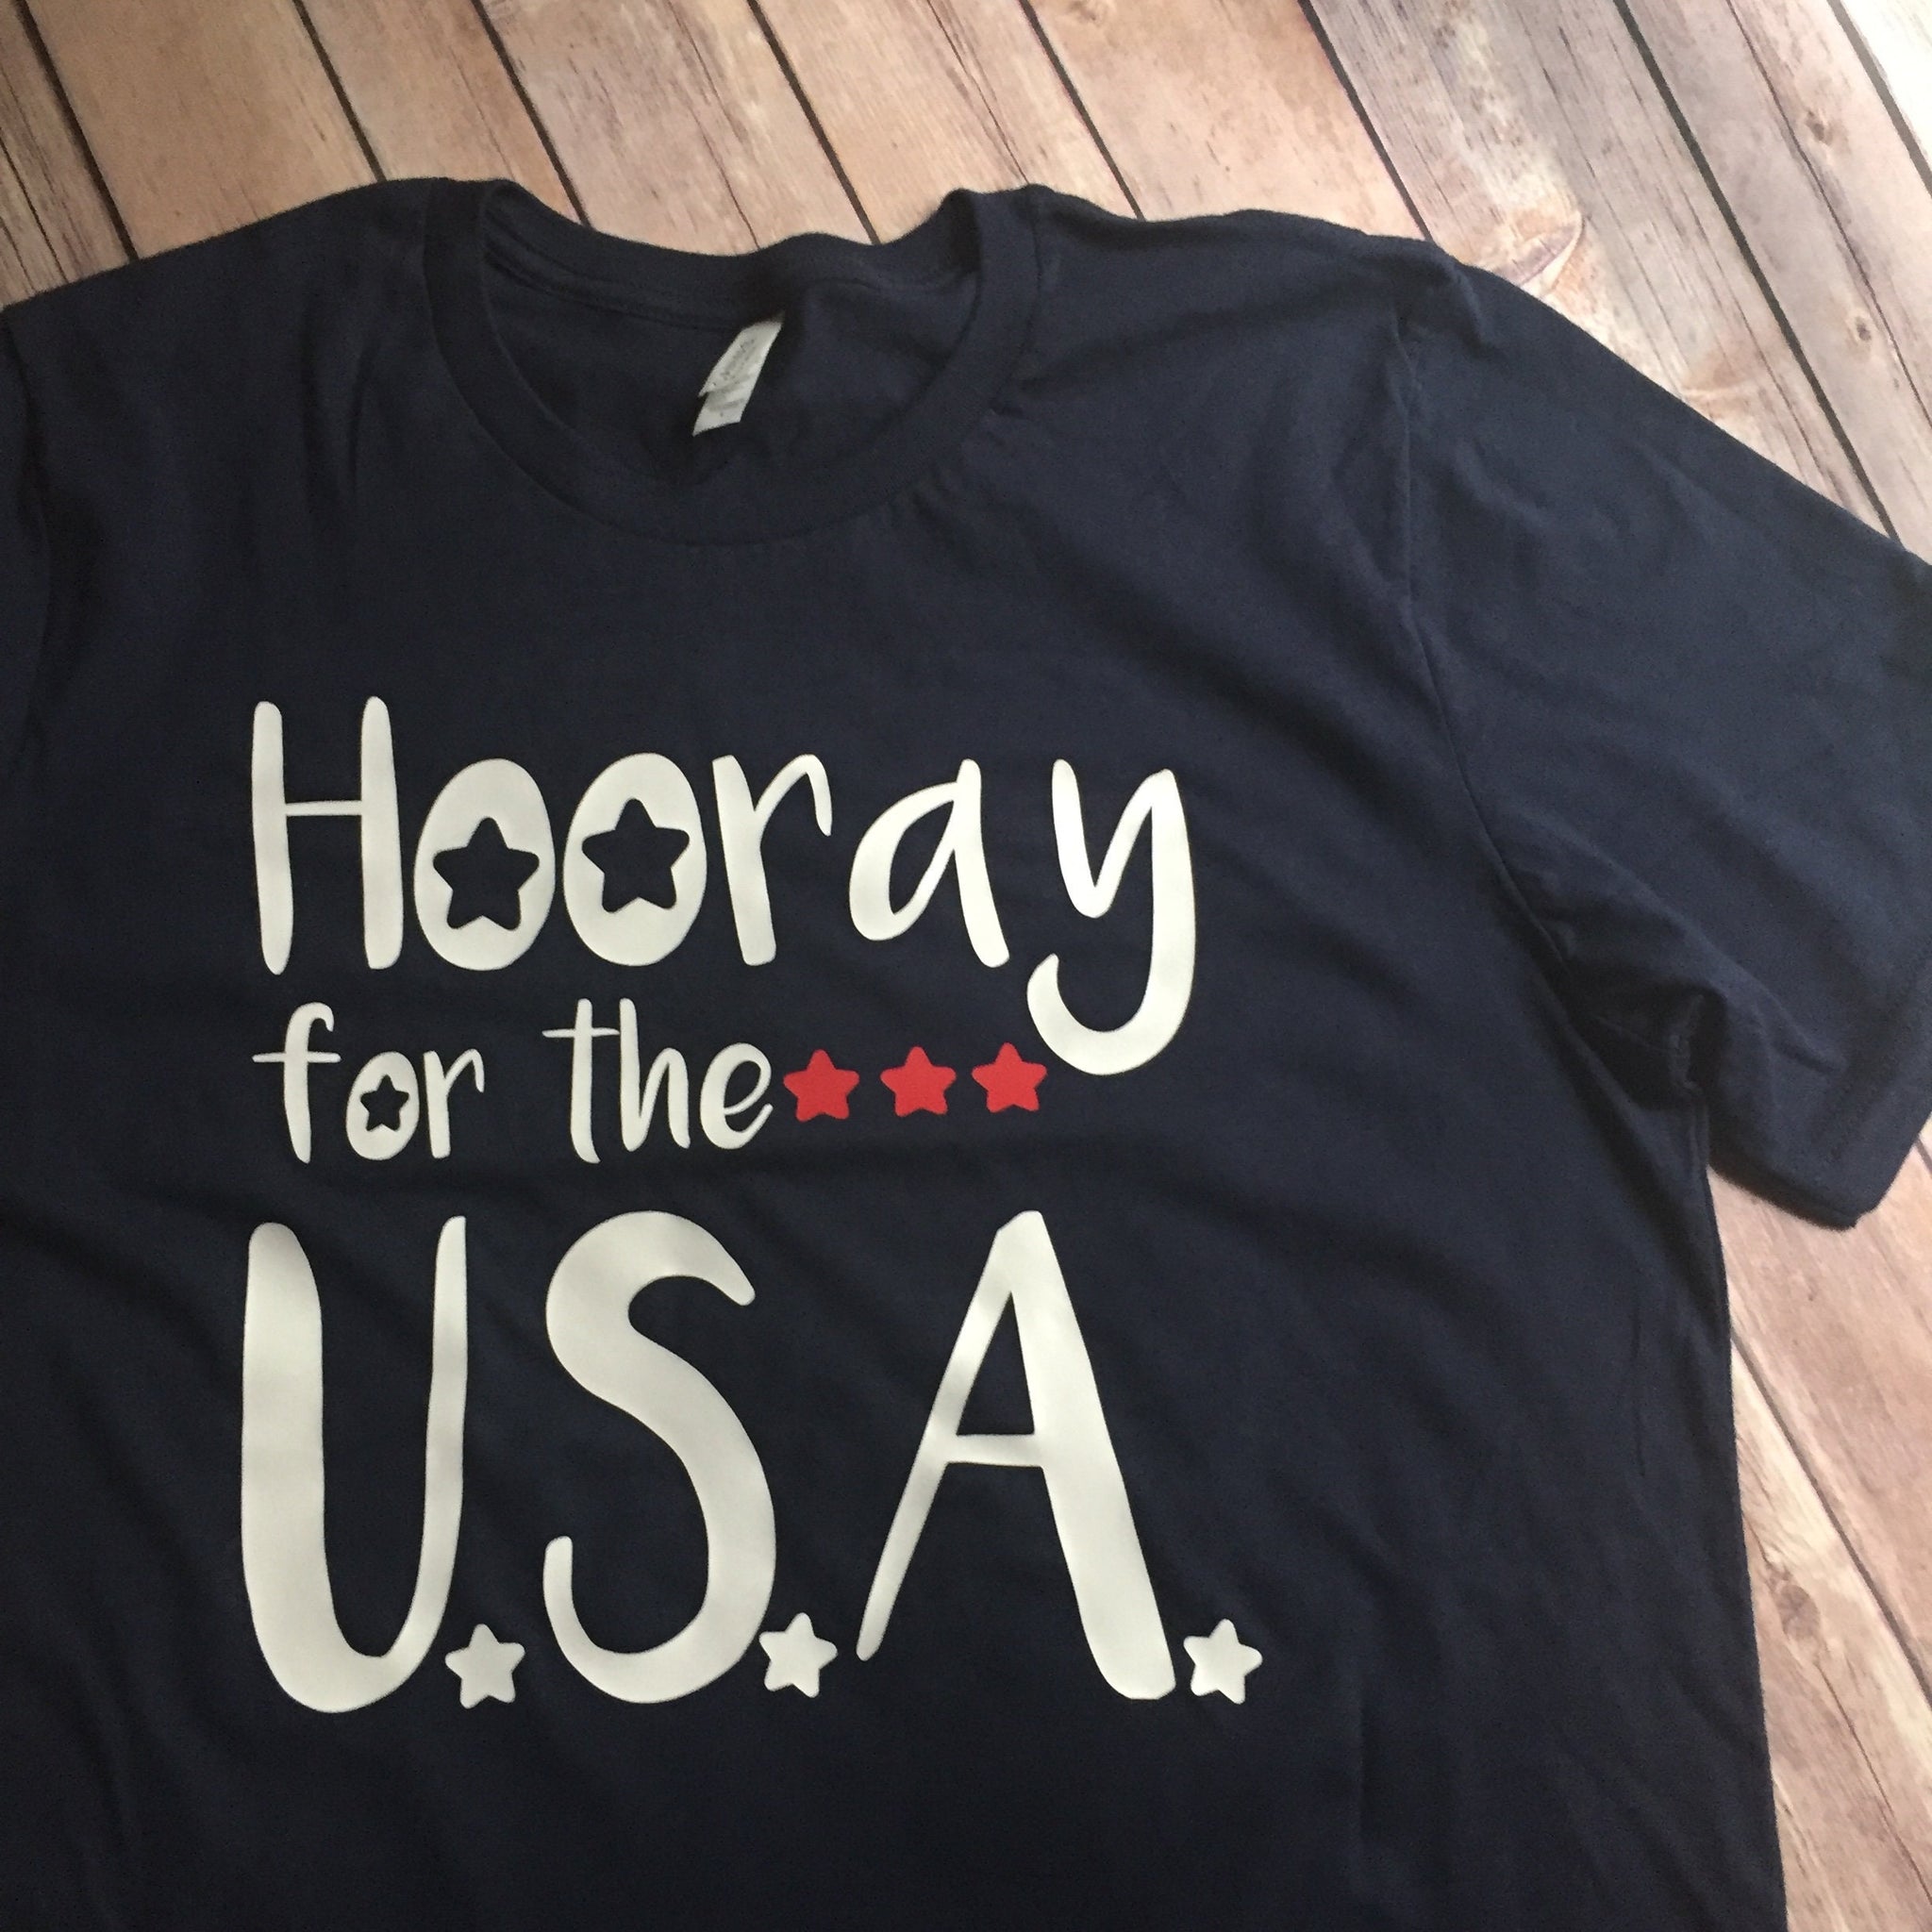 "Hooray for the USA" Unisex Adult Shirt in Navy